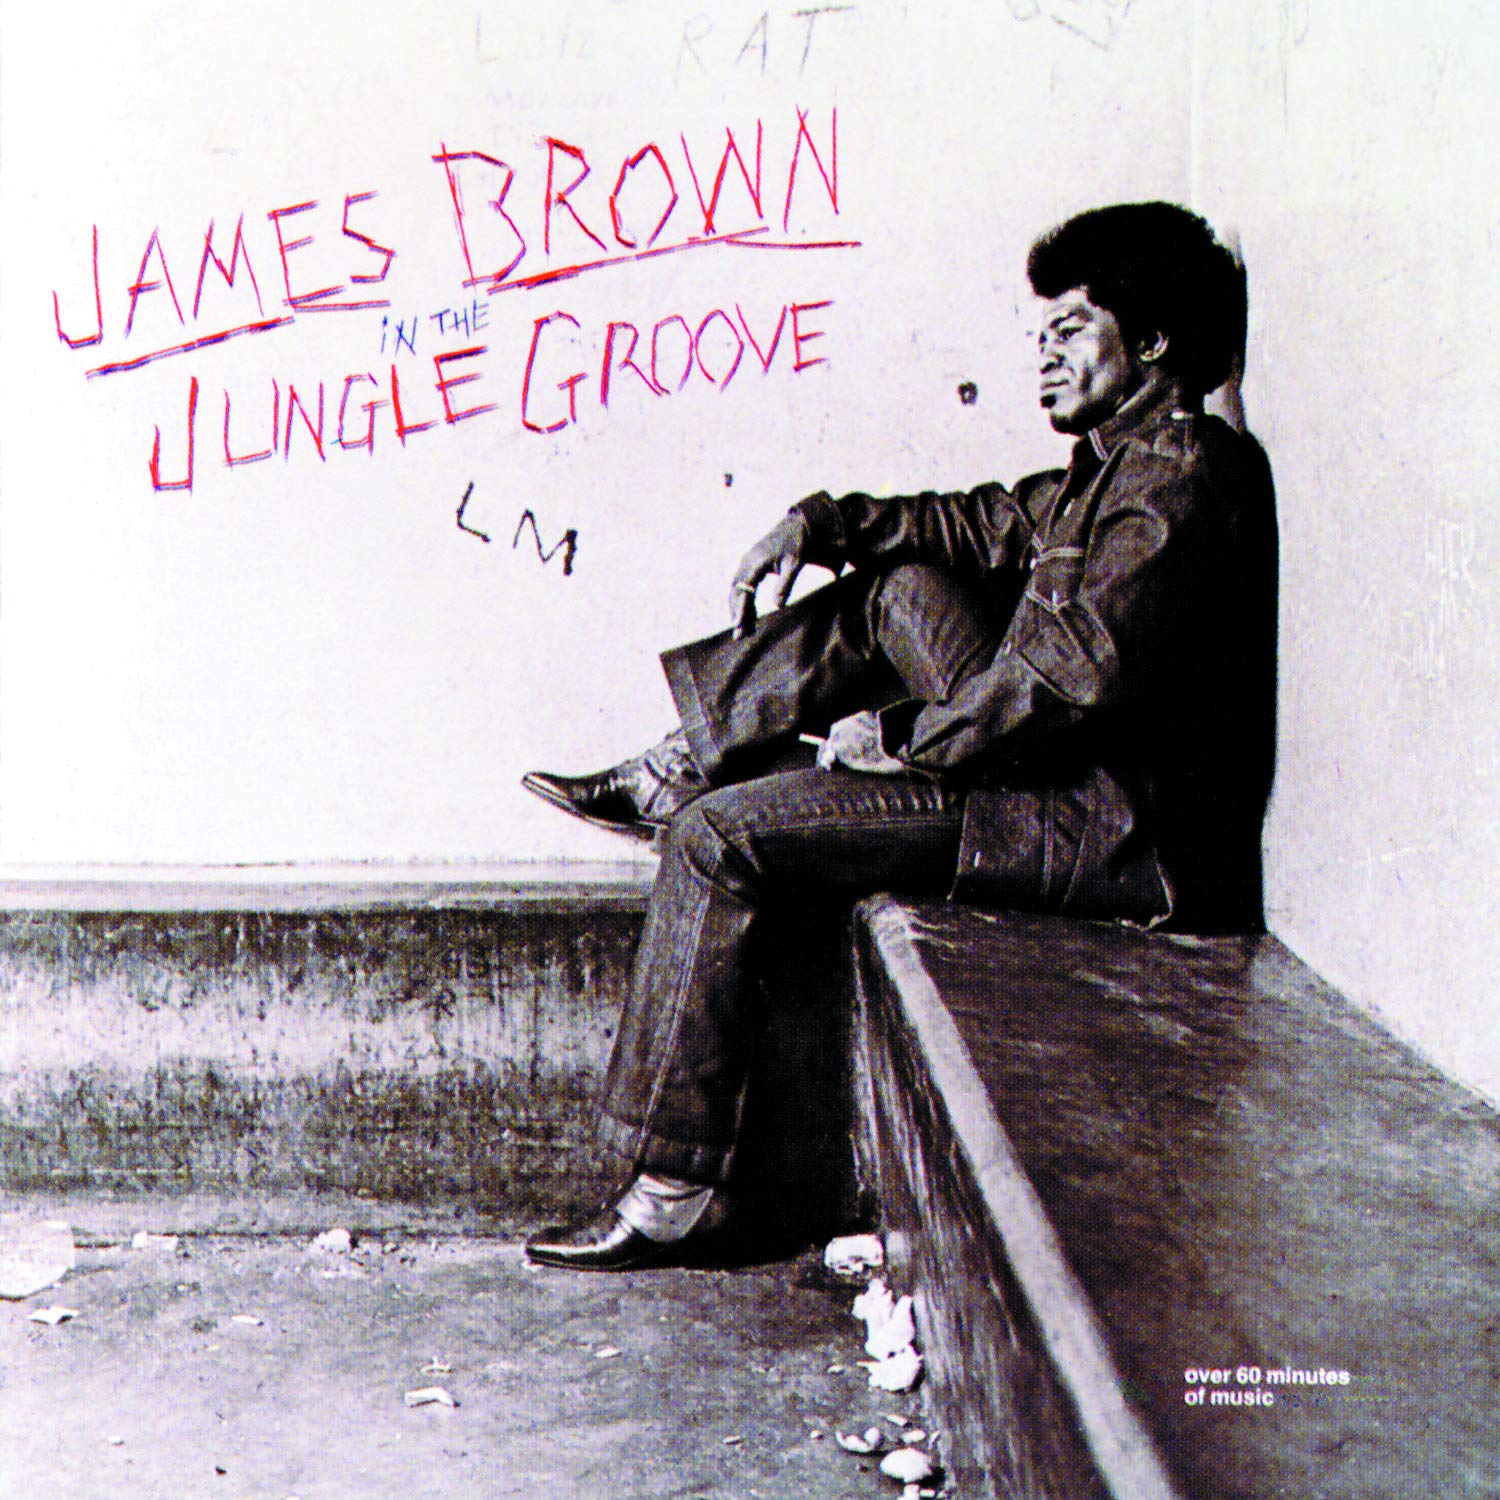 CD Shop - BROWN JAMES IN THE JUNGLE GROOVE